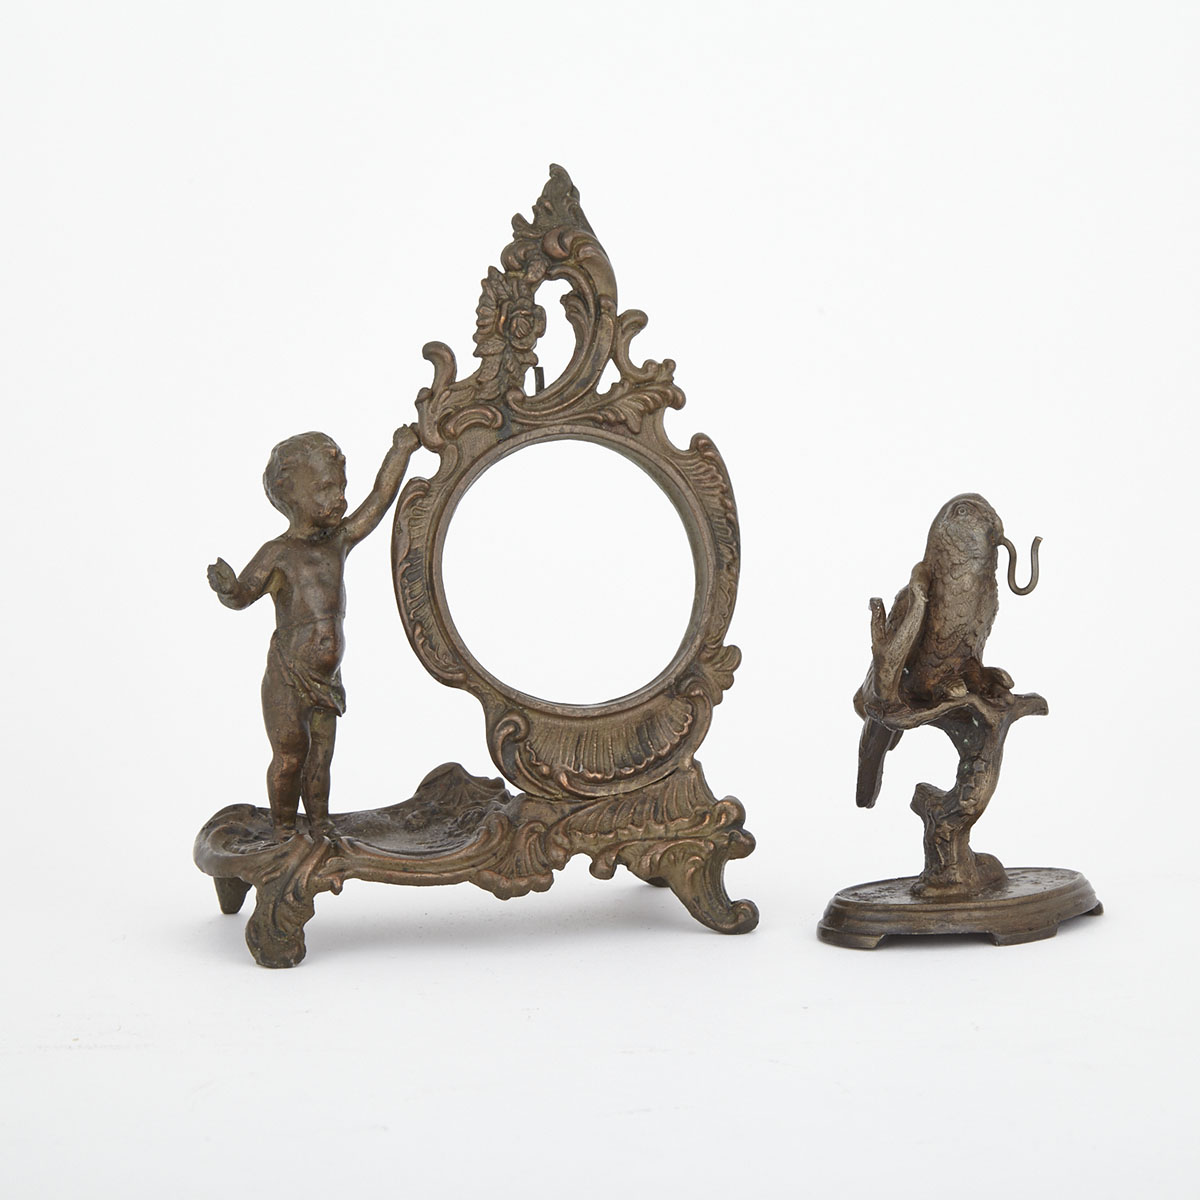 Two Victorian Patinated Bronze Pocket Watch Stands, 19th century